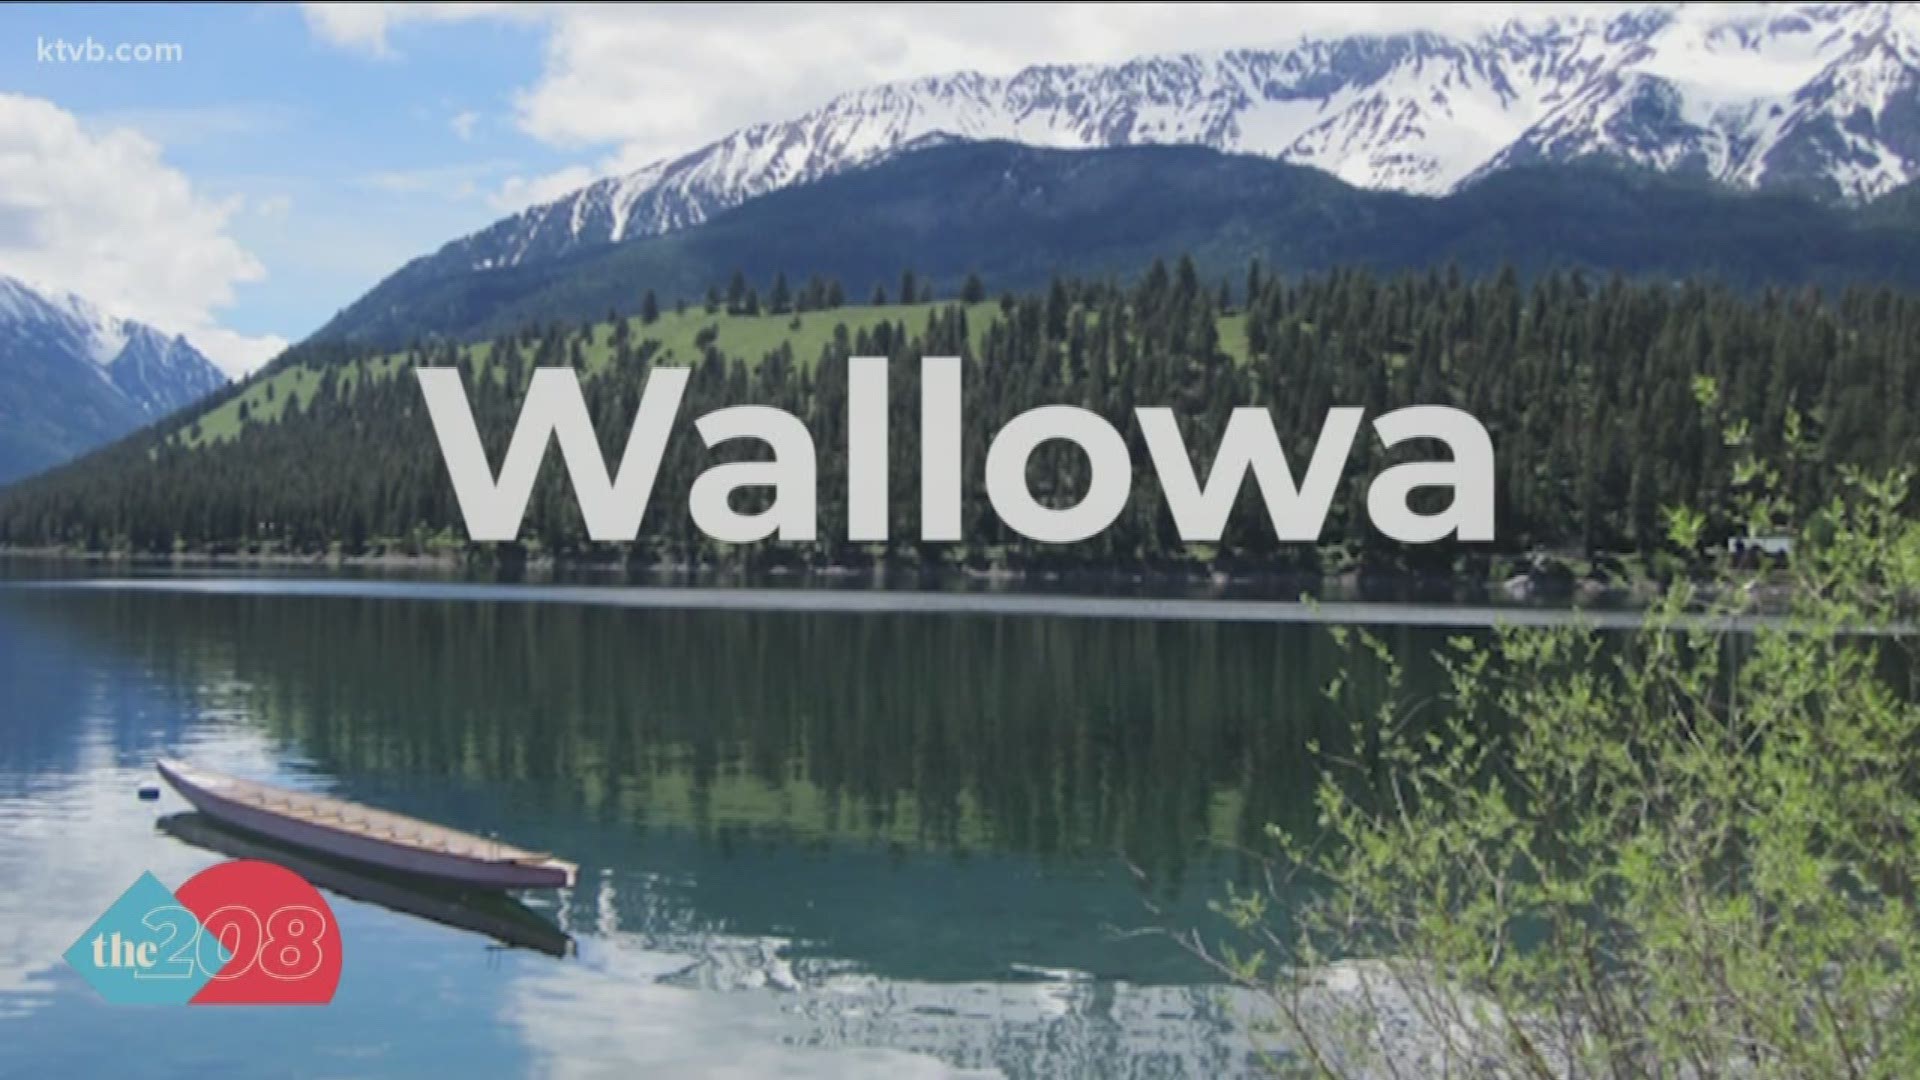 Brian Holmes found an expert who helped us understand the meaning of the word "Wallowa" and how to properly pronounce it.